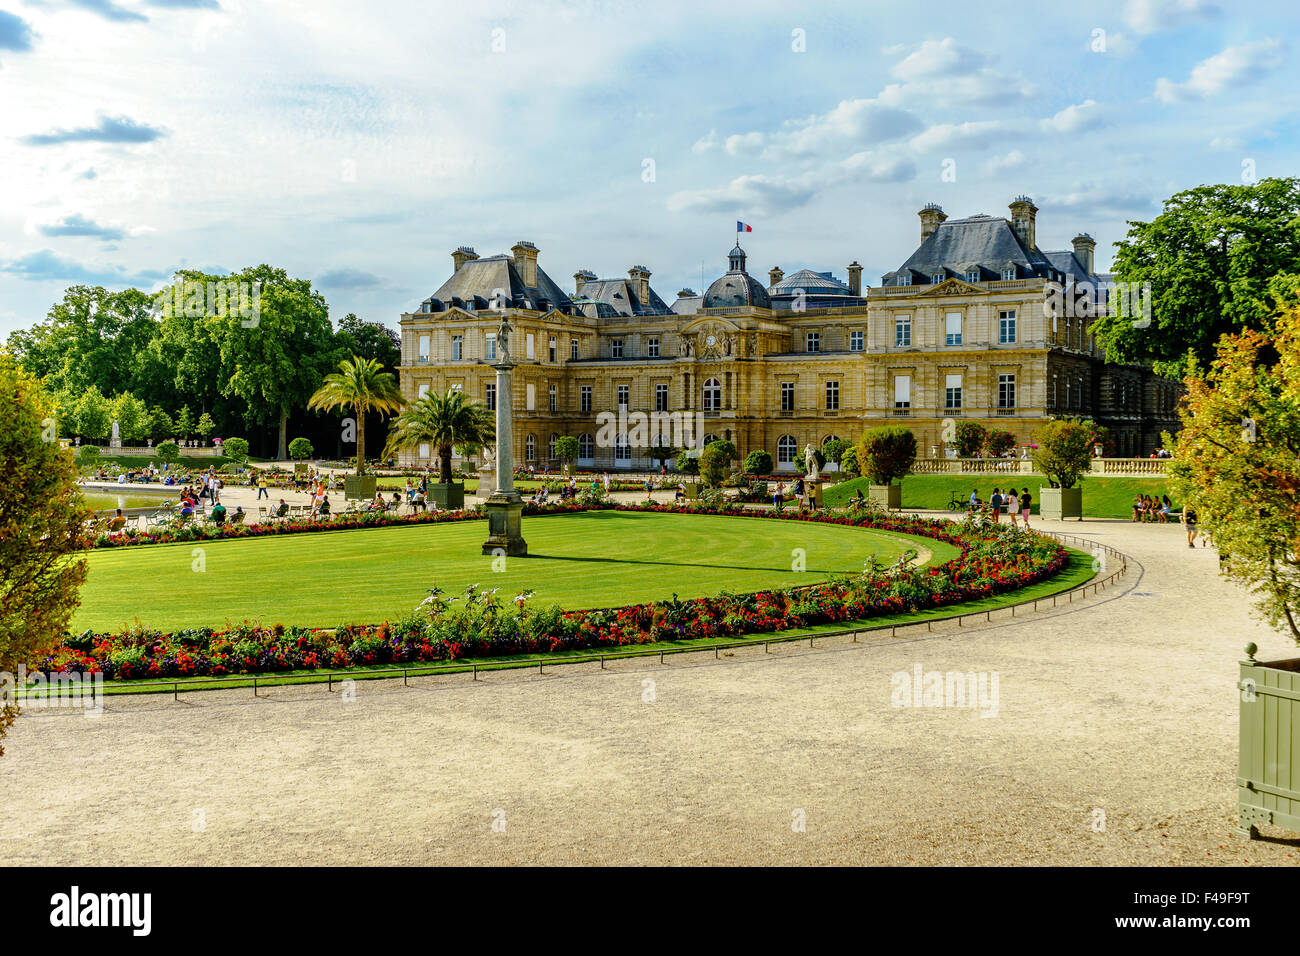 Right-side view of the Luxembourg Gardens. July, 2015. Paris, France. Stock Photo